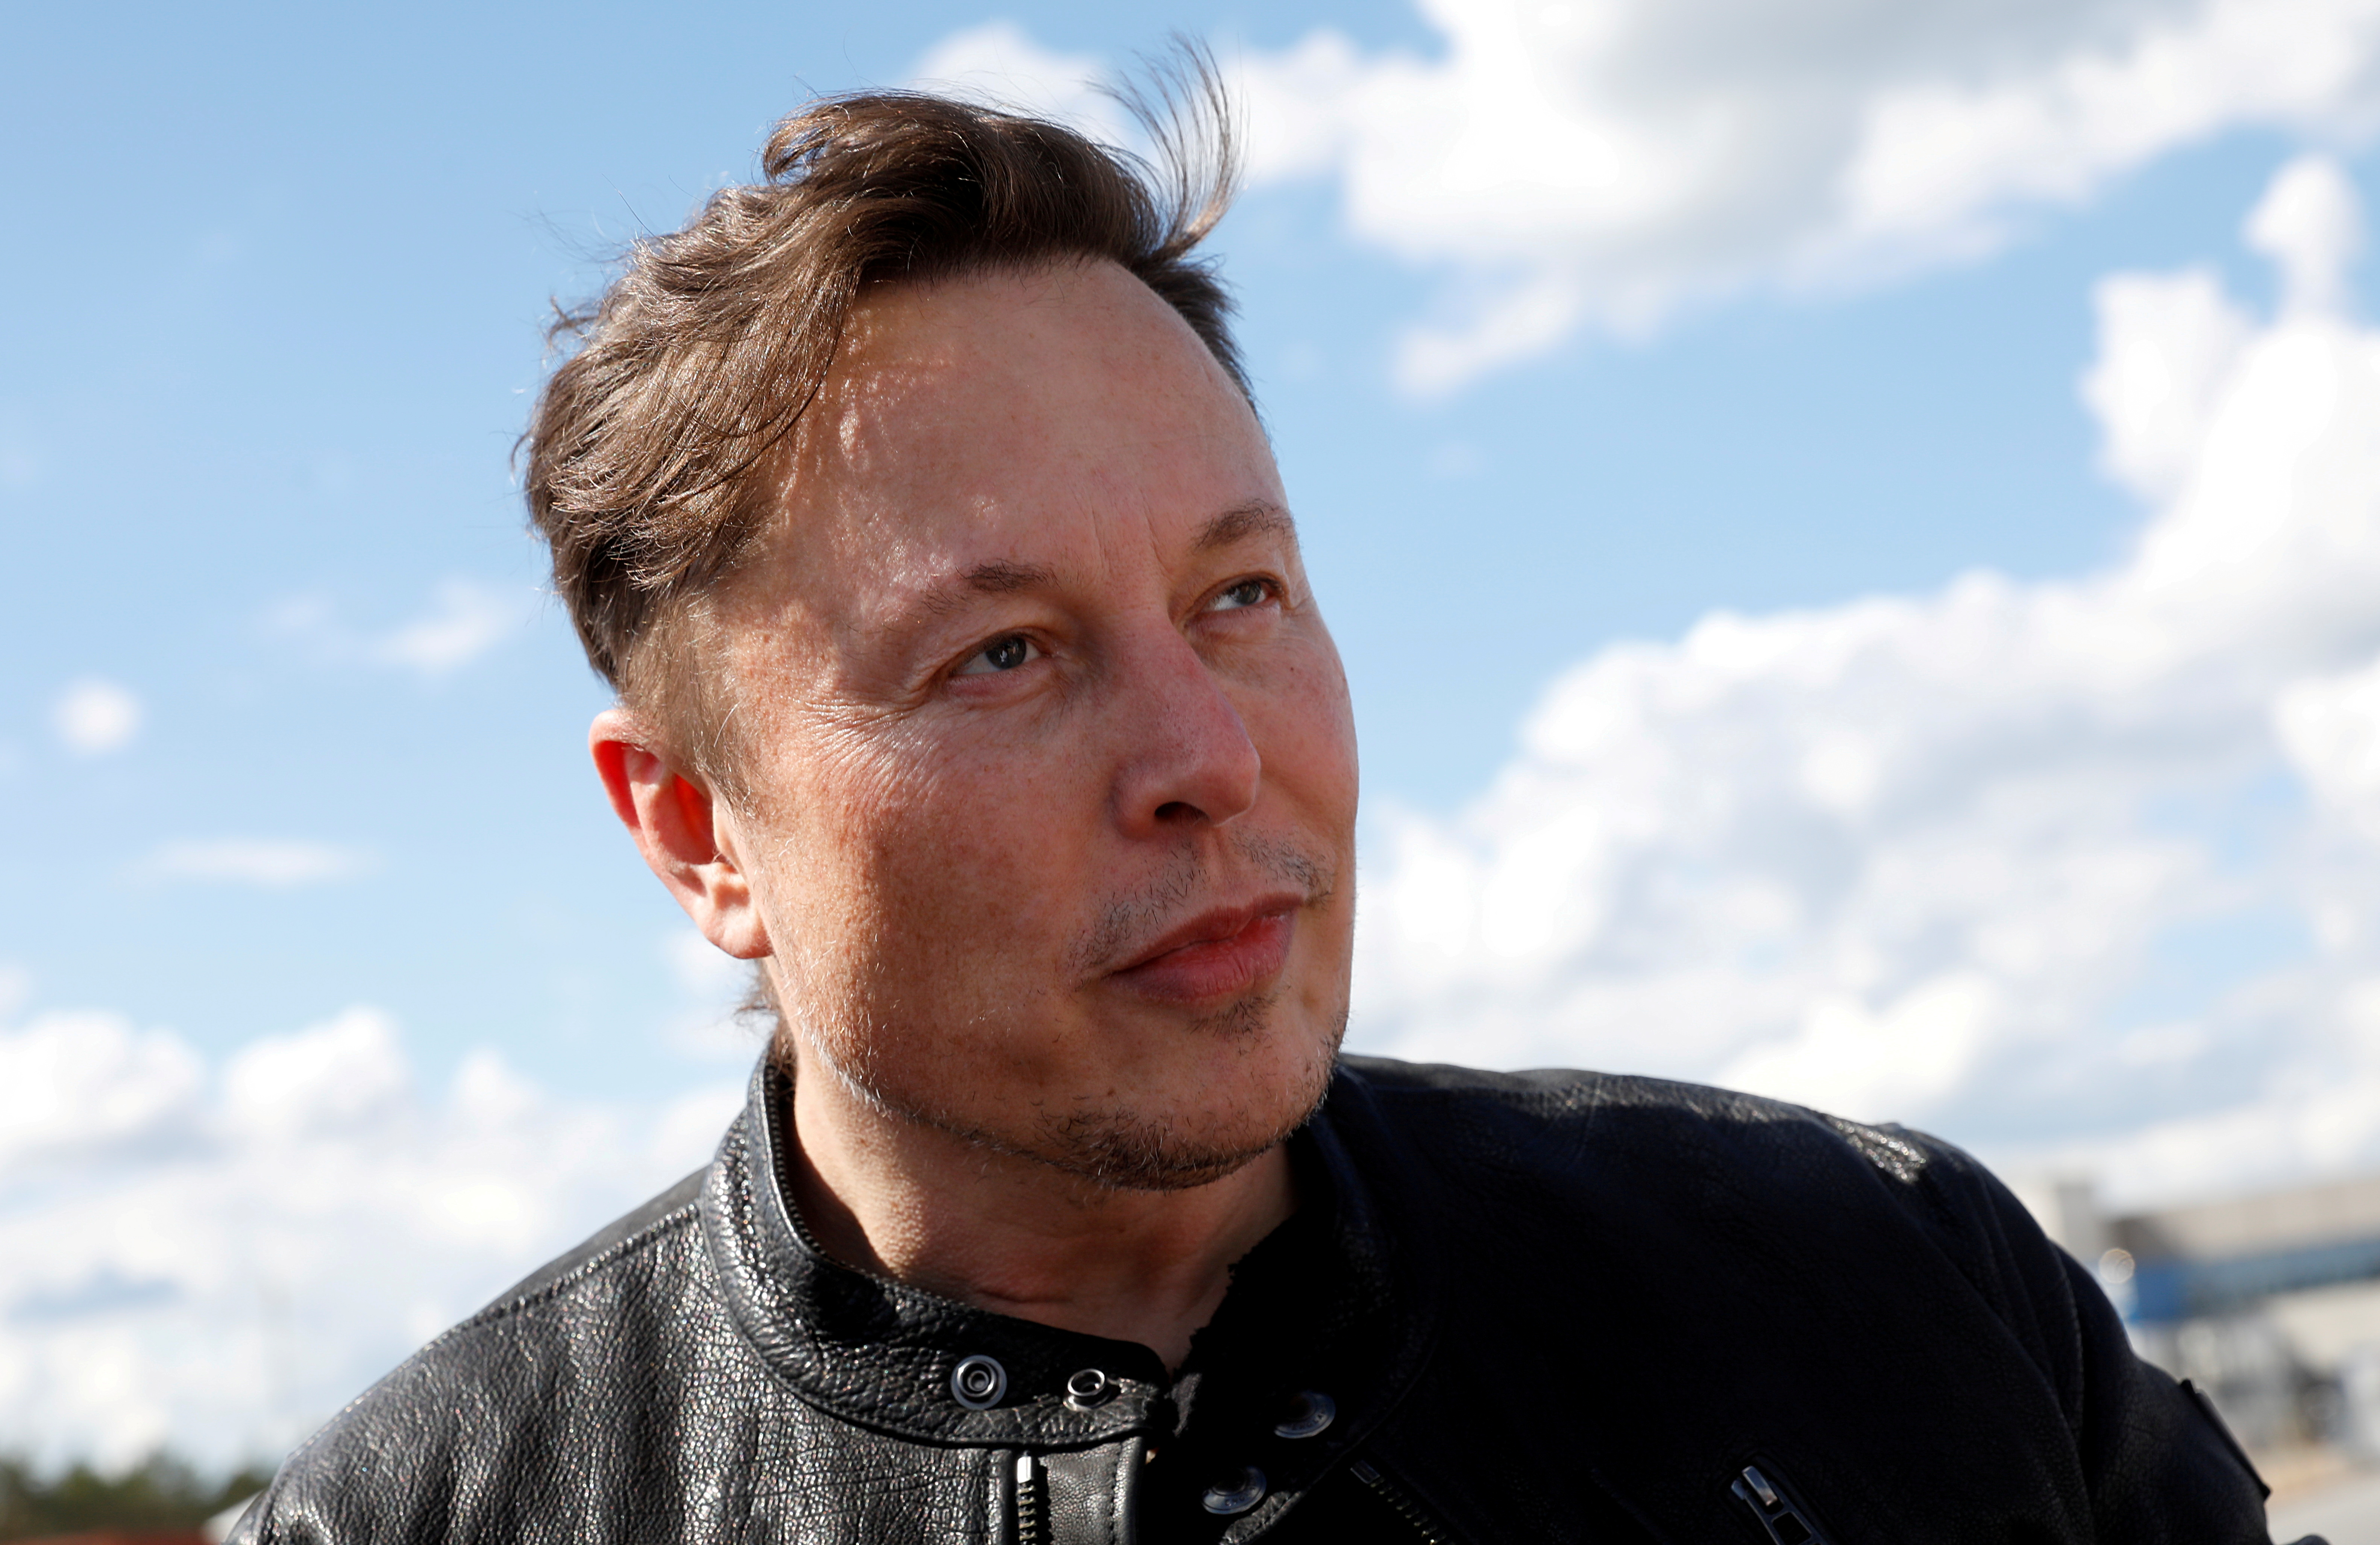 SpaceX founder and Tesla CEO Elon Musk looks on as he visits the construction site of Tesla's gigafactory in Gruenheide, near Berlin, Germany, May 17, 2021. REUTERS/Michele Tantussi/File Photo